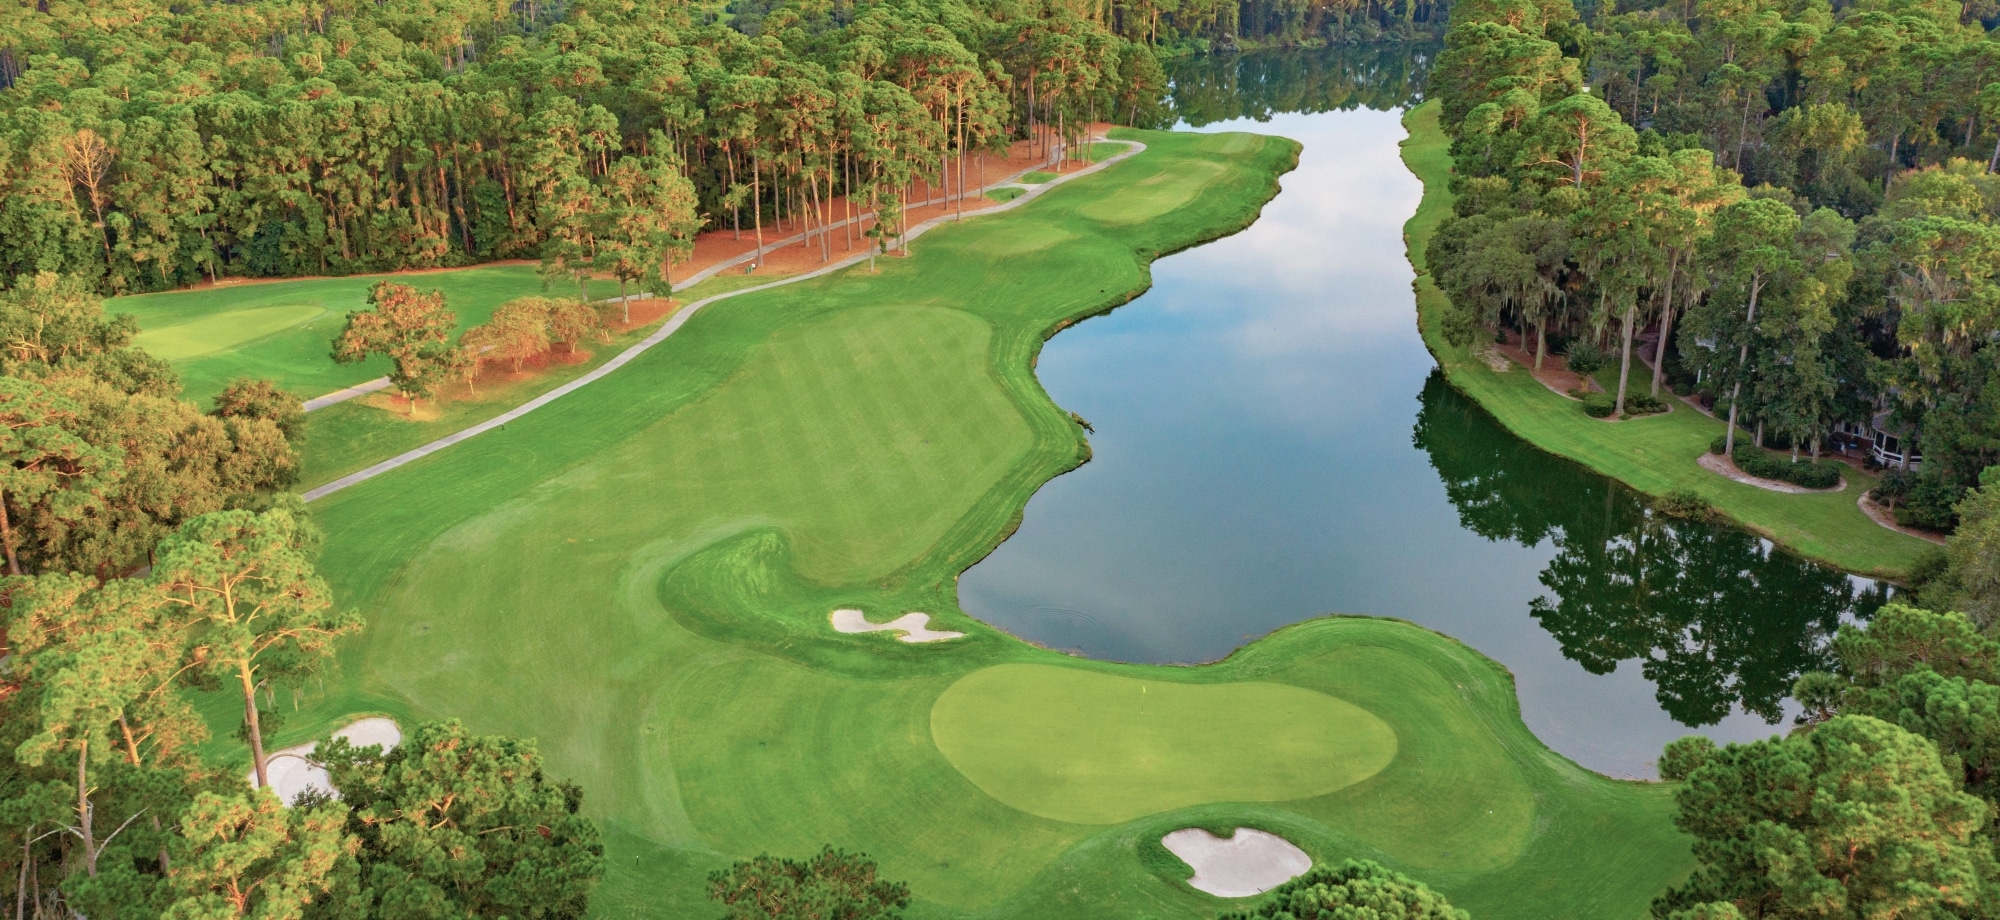 An aerial view of Deer Creek golf course hole #5 lined with trees and a lagoon.